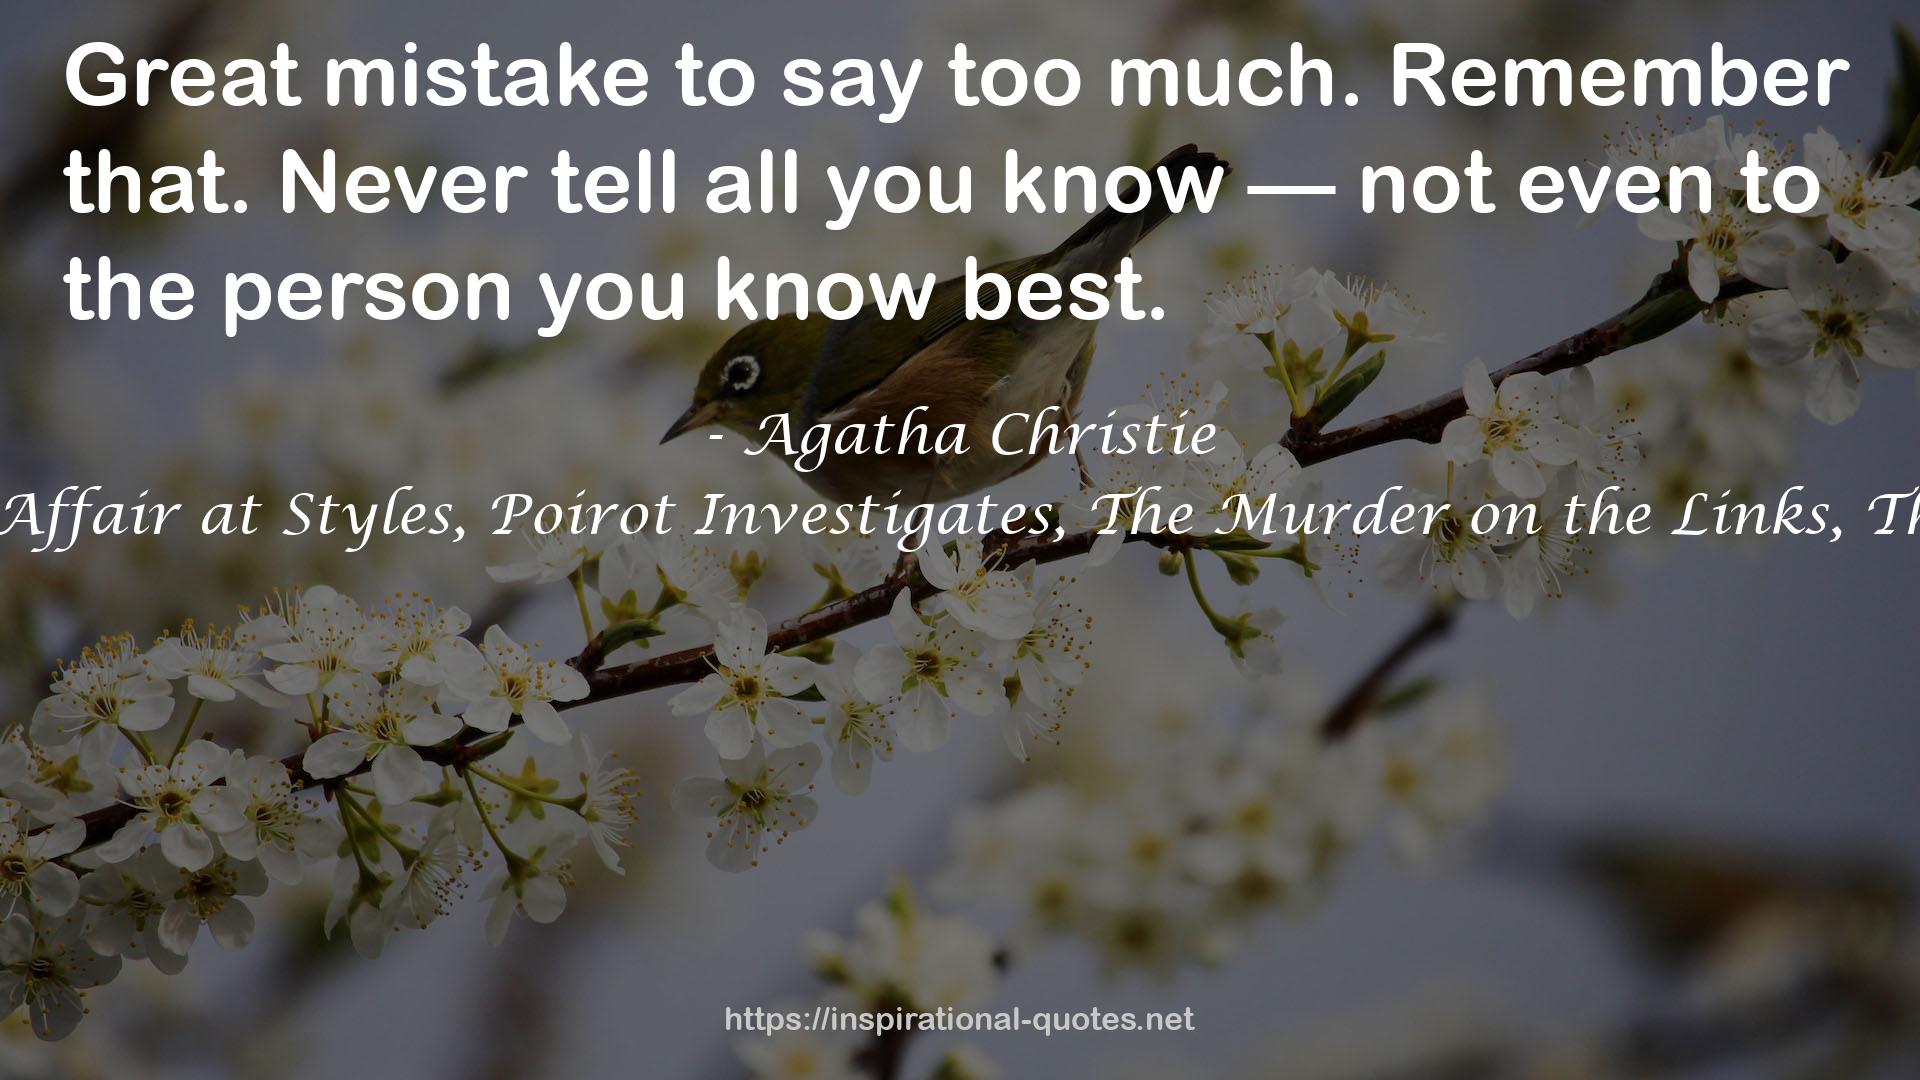 Agatha Christie: The Collection: The Mysterious Affair at Styles, Poirot Investigates, The Murder on the Links, The Secret Adversary, The Man in the Brown Suit QUOTES